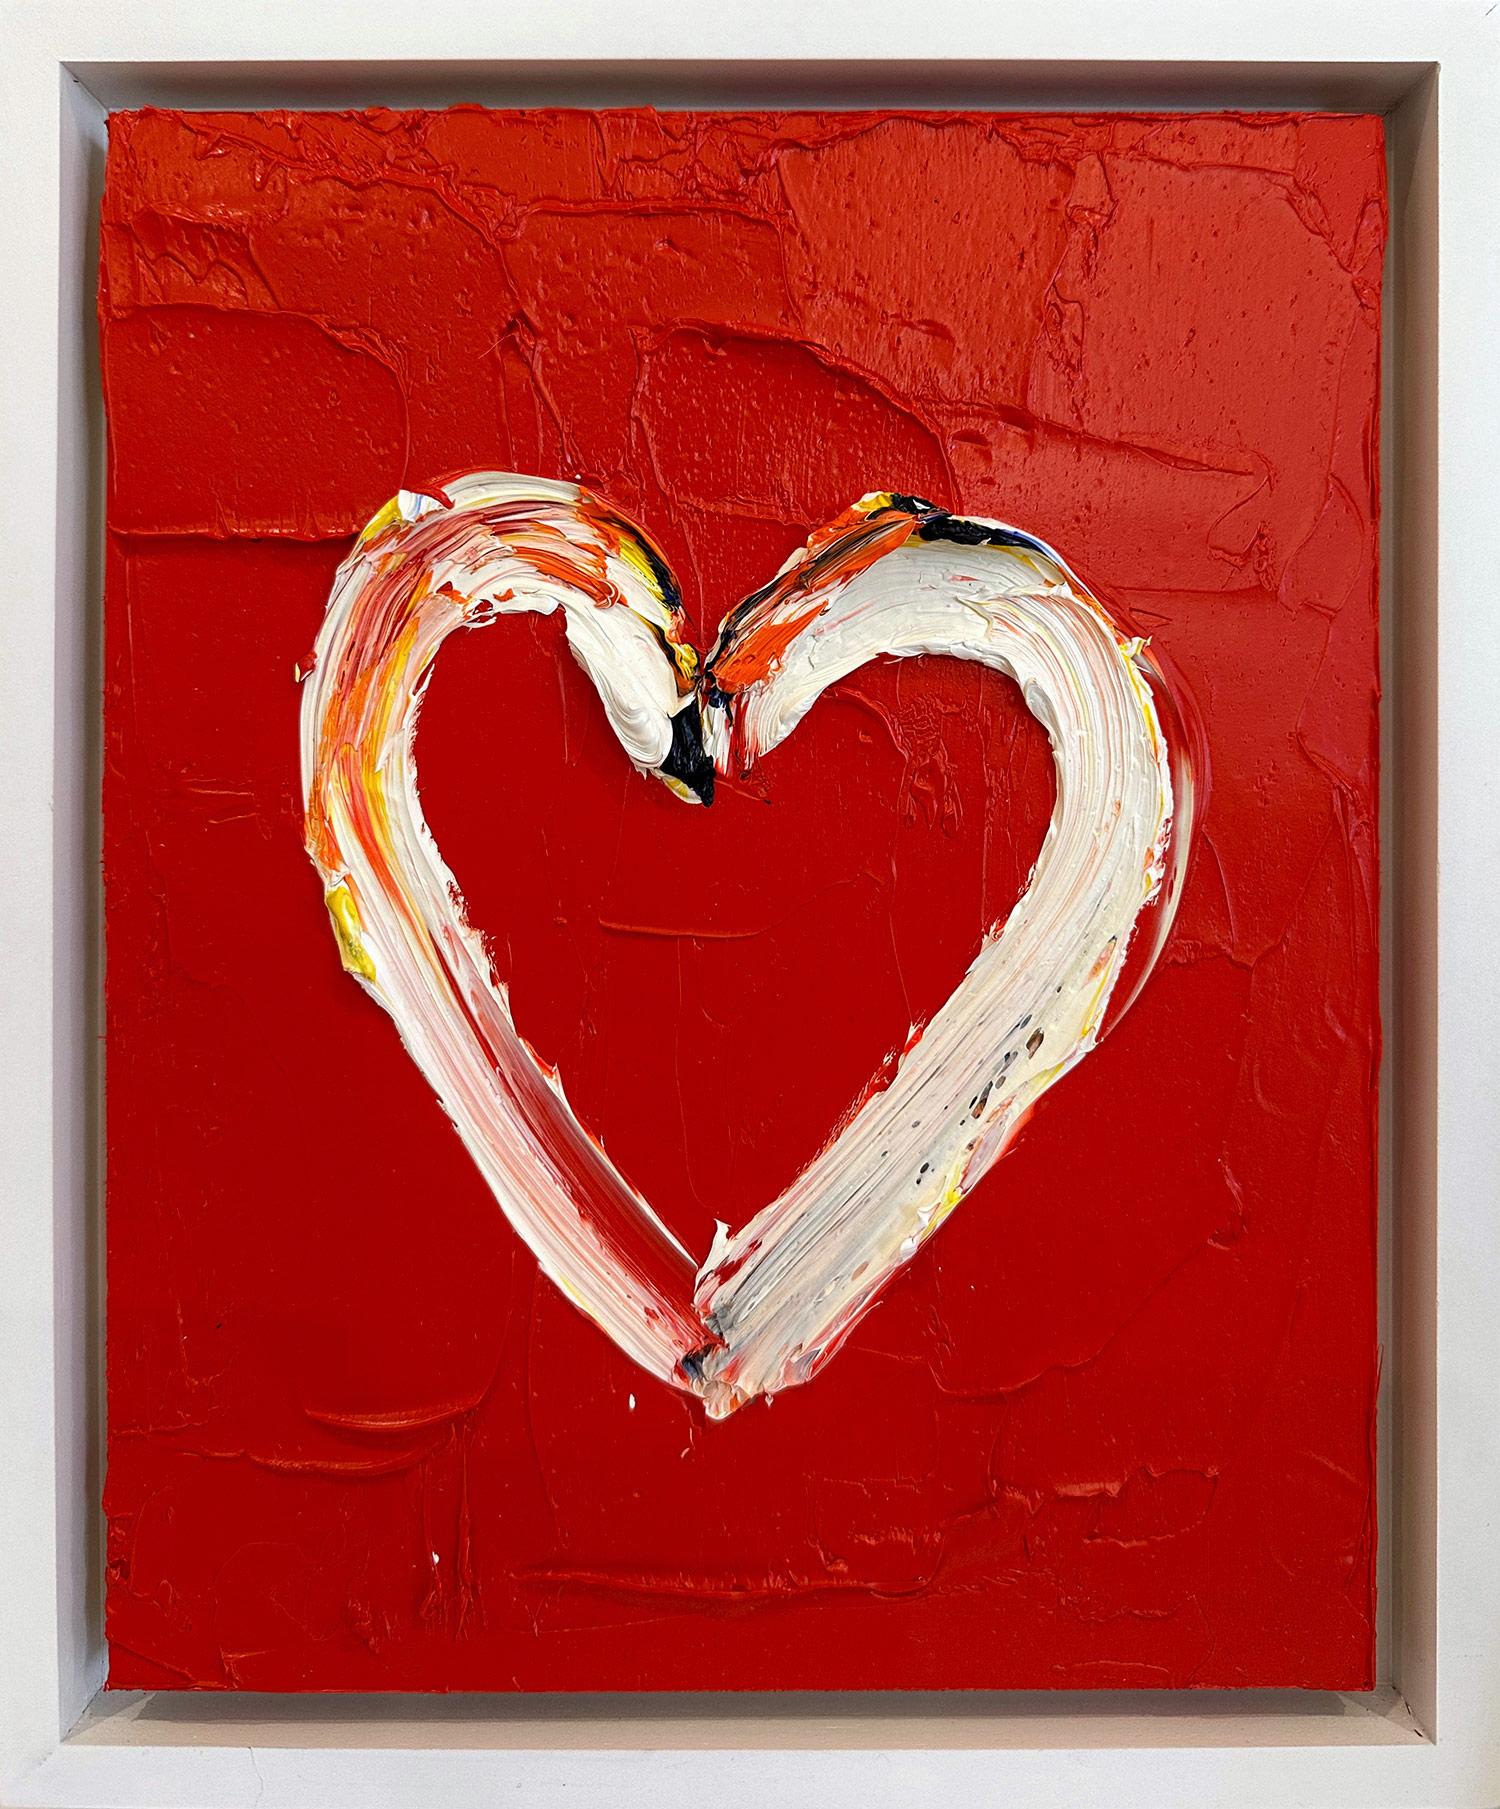 Cindy Shaoul Figurative Painting - "My Lion Brave Heart" Contemporary Pop Art Red Oil Painting with Floater Frame